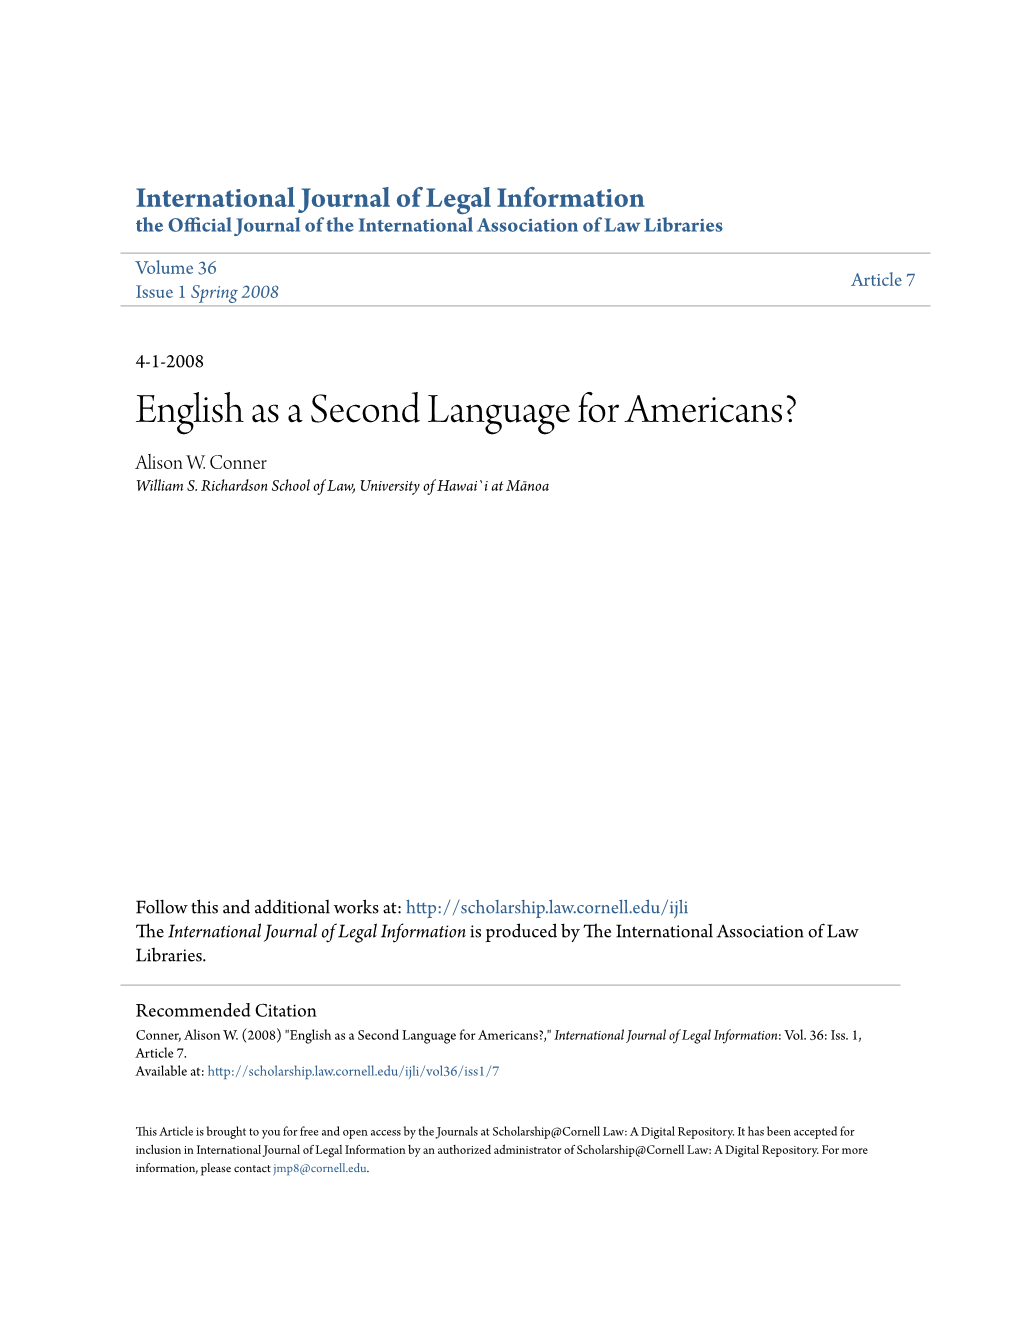 English As a Second Language for Americans? Alison W